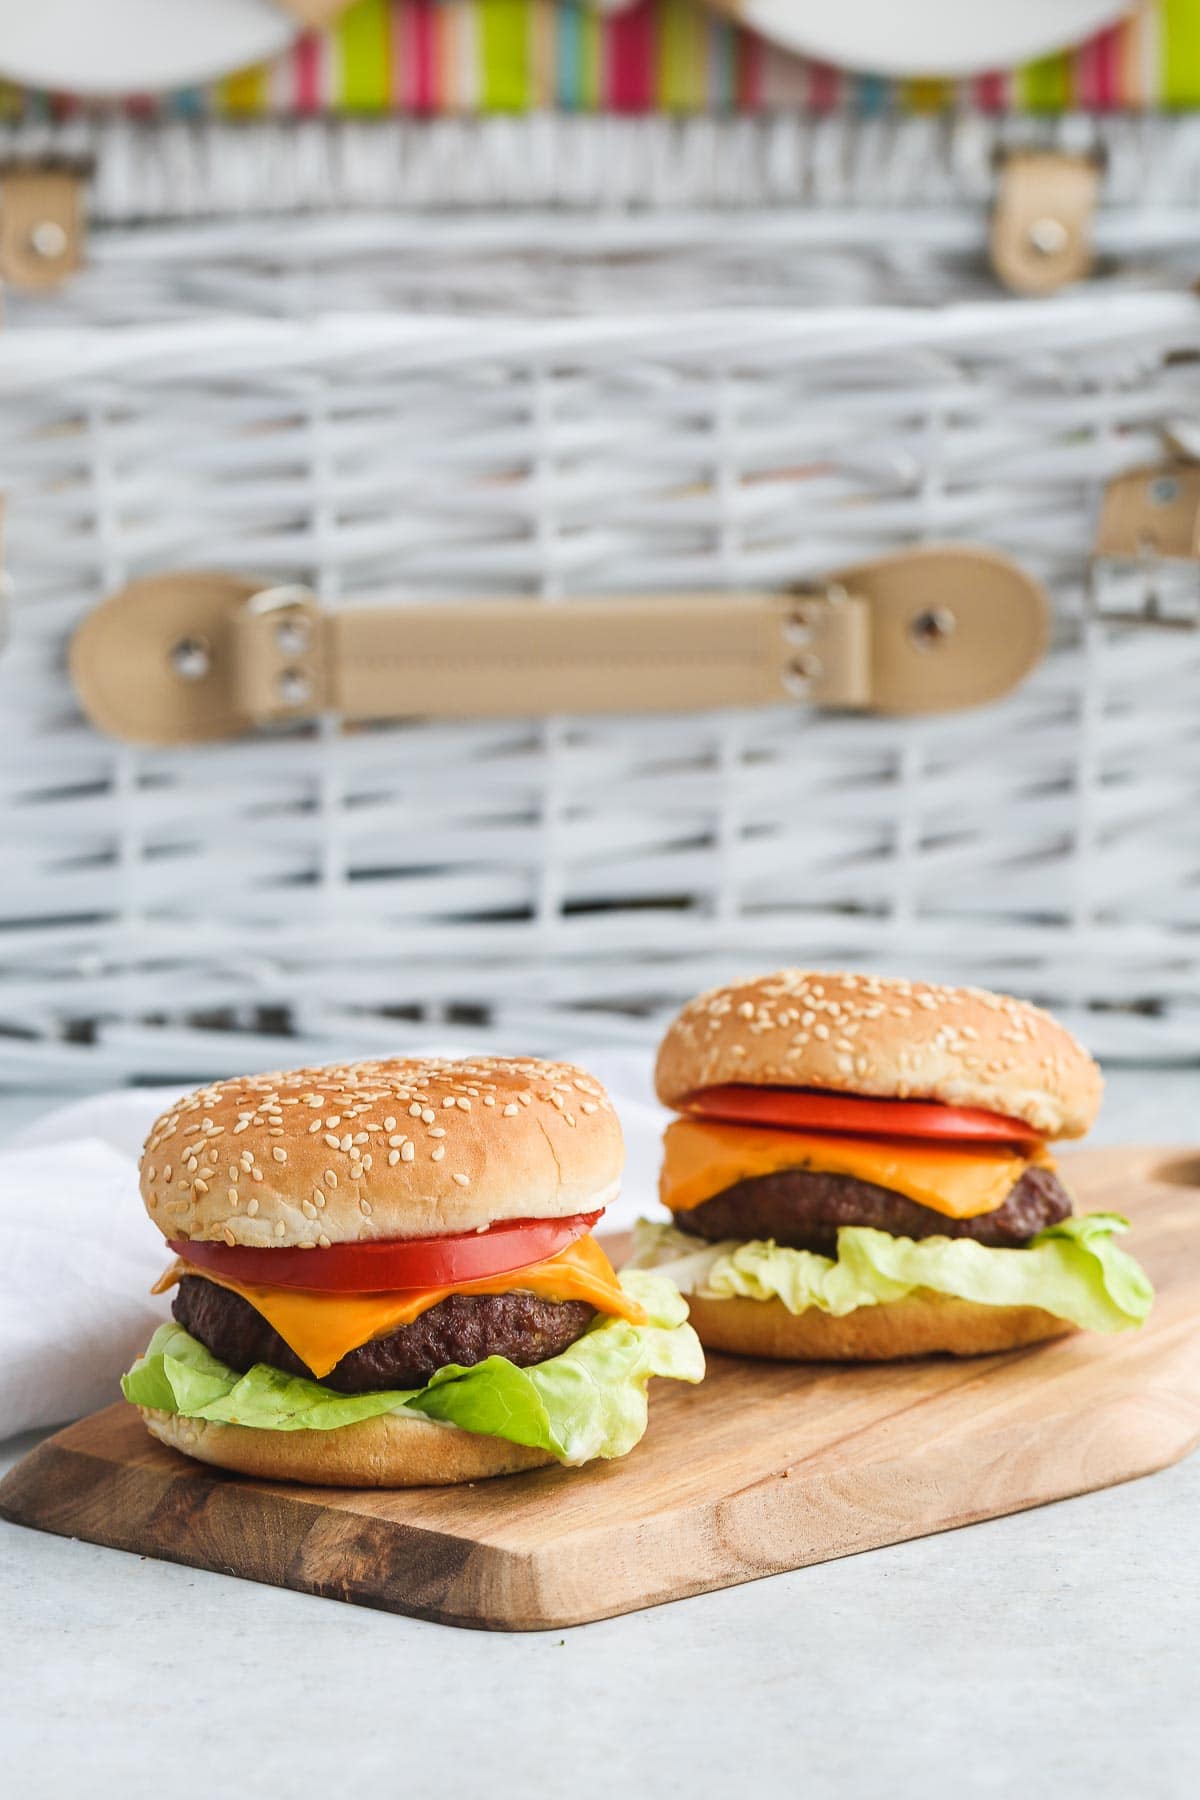 Two hamburgers on a wooden board.